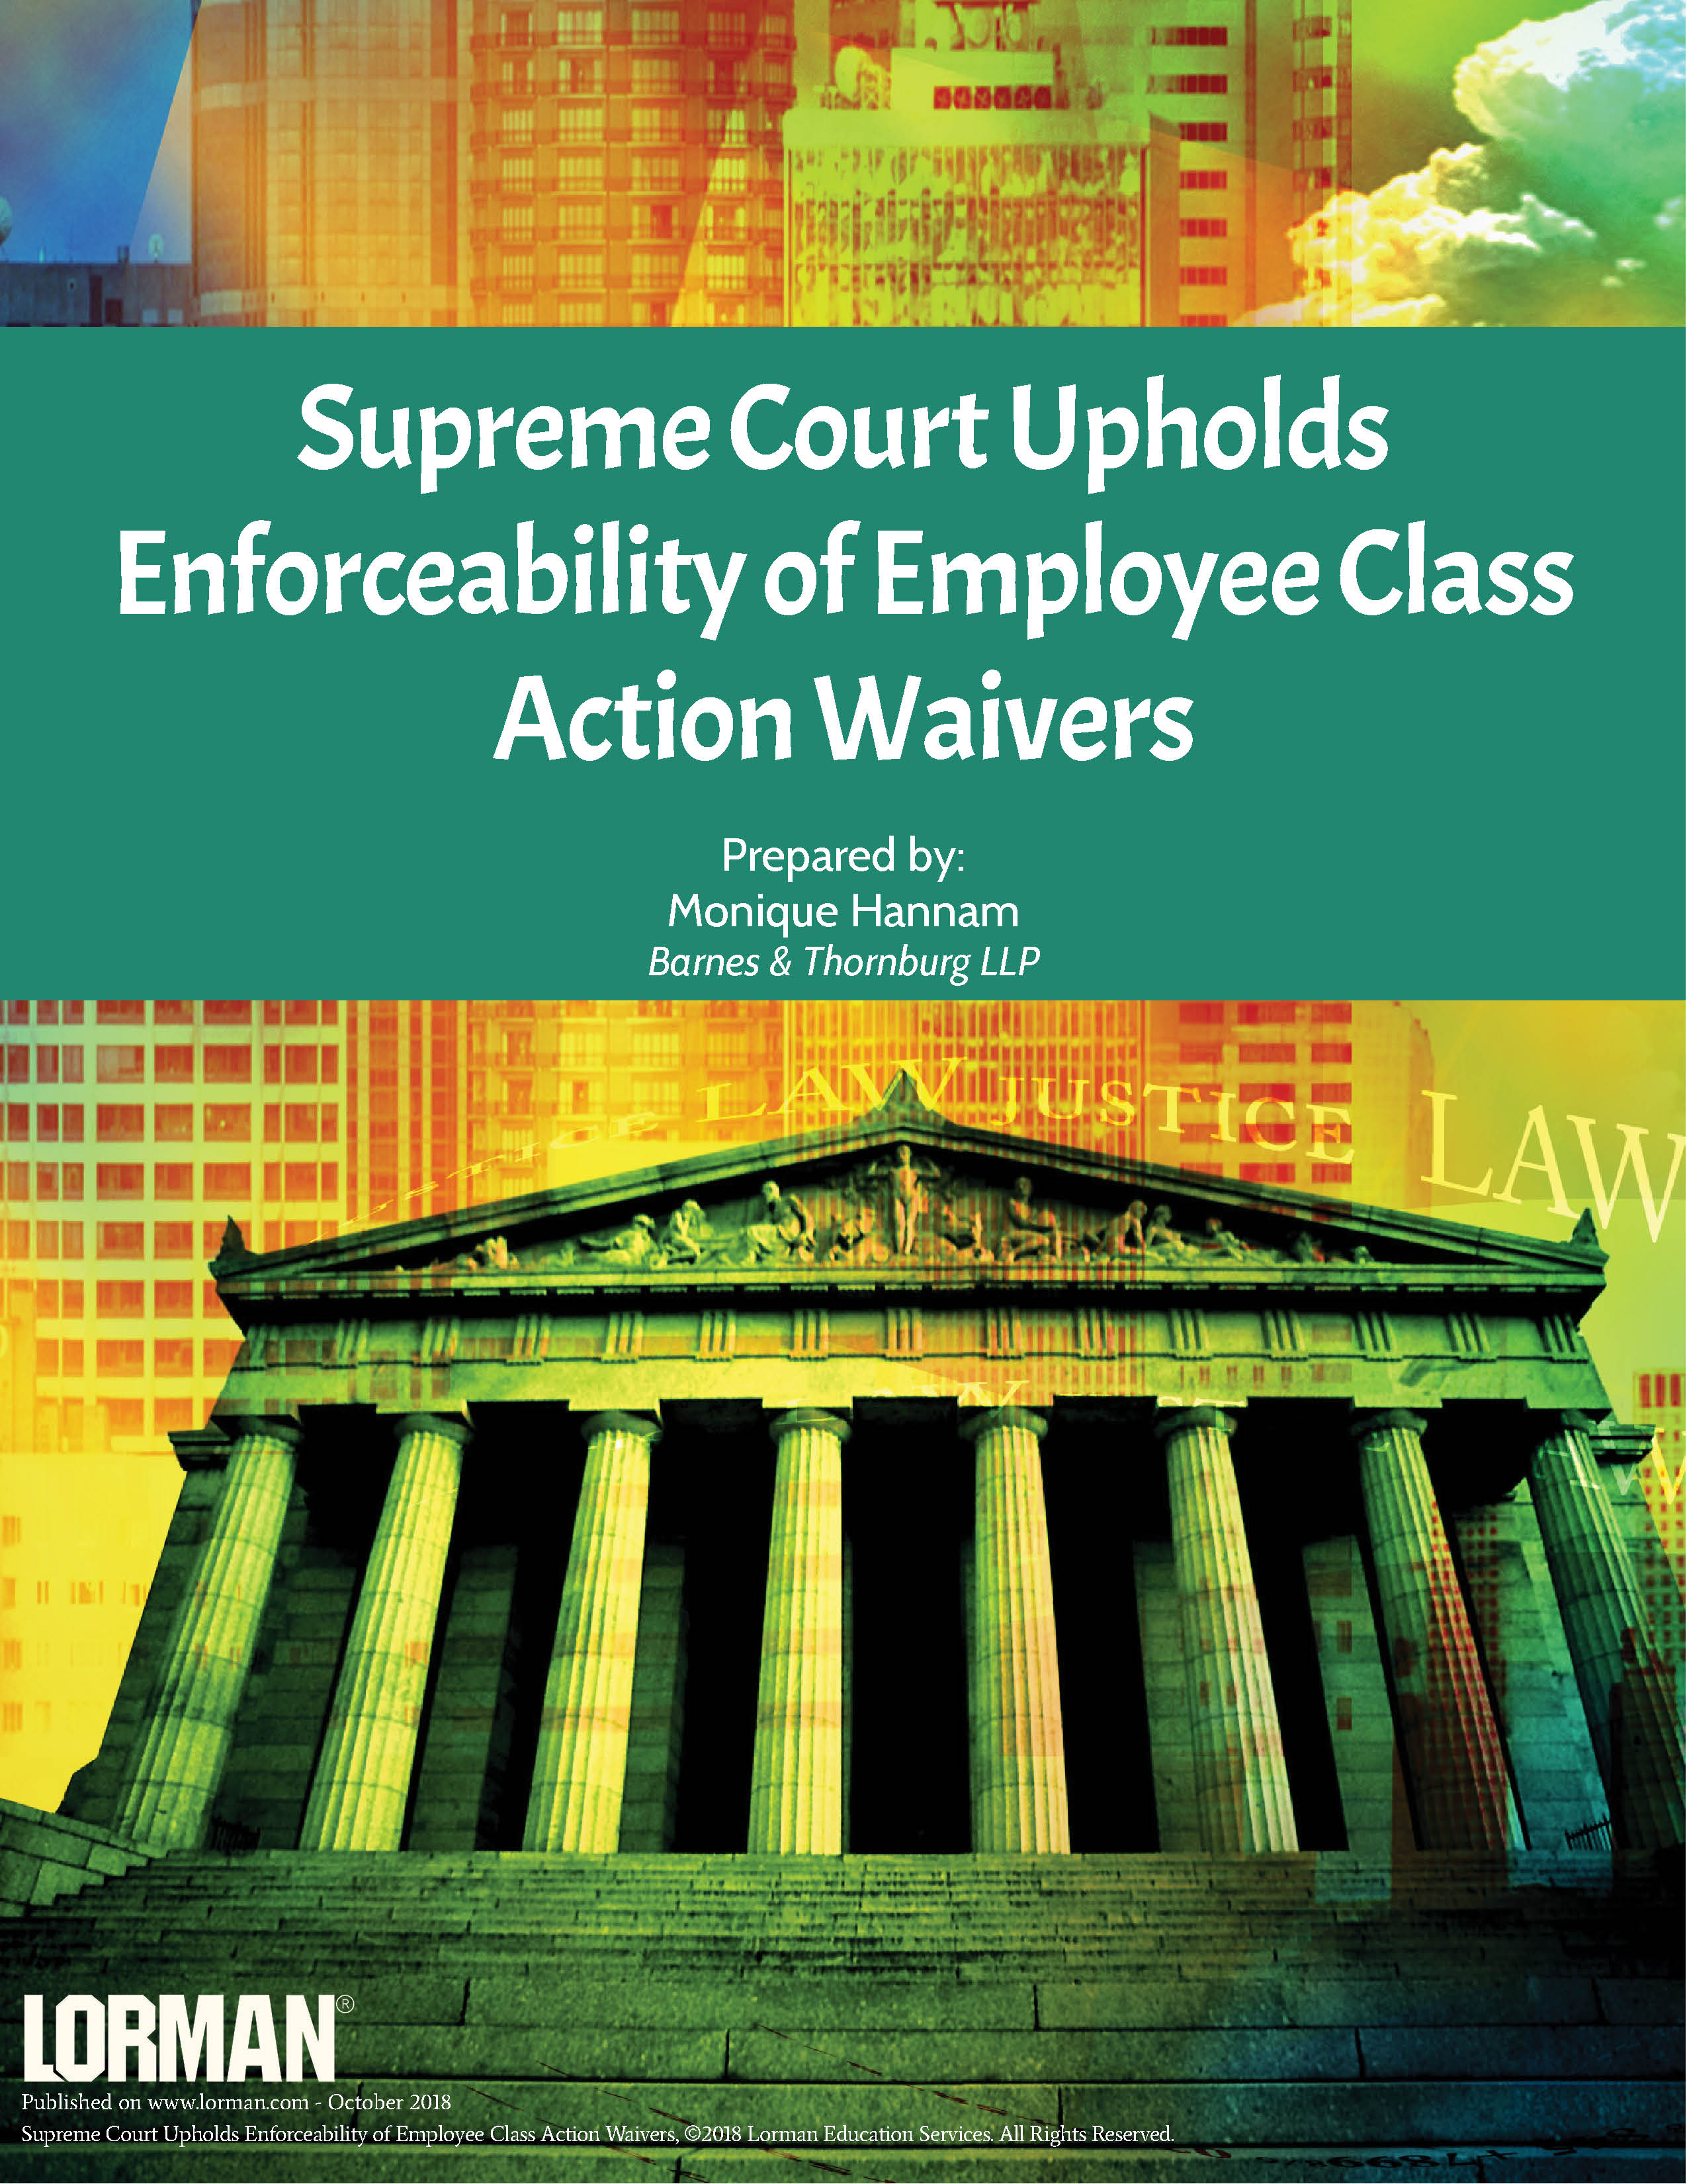 Supreme Court Upholds Enforceability of Employee Class Action Waivers